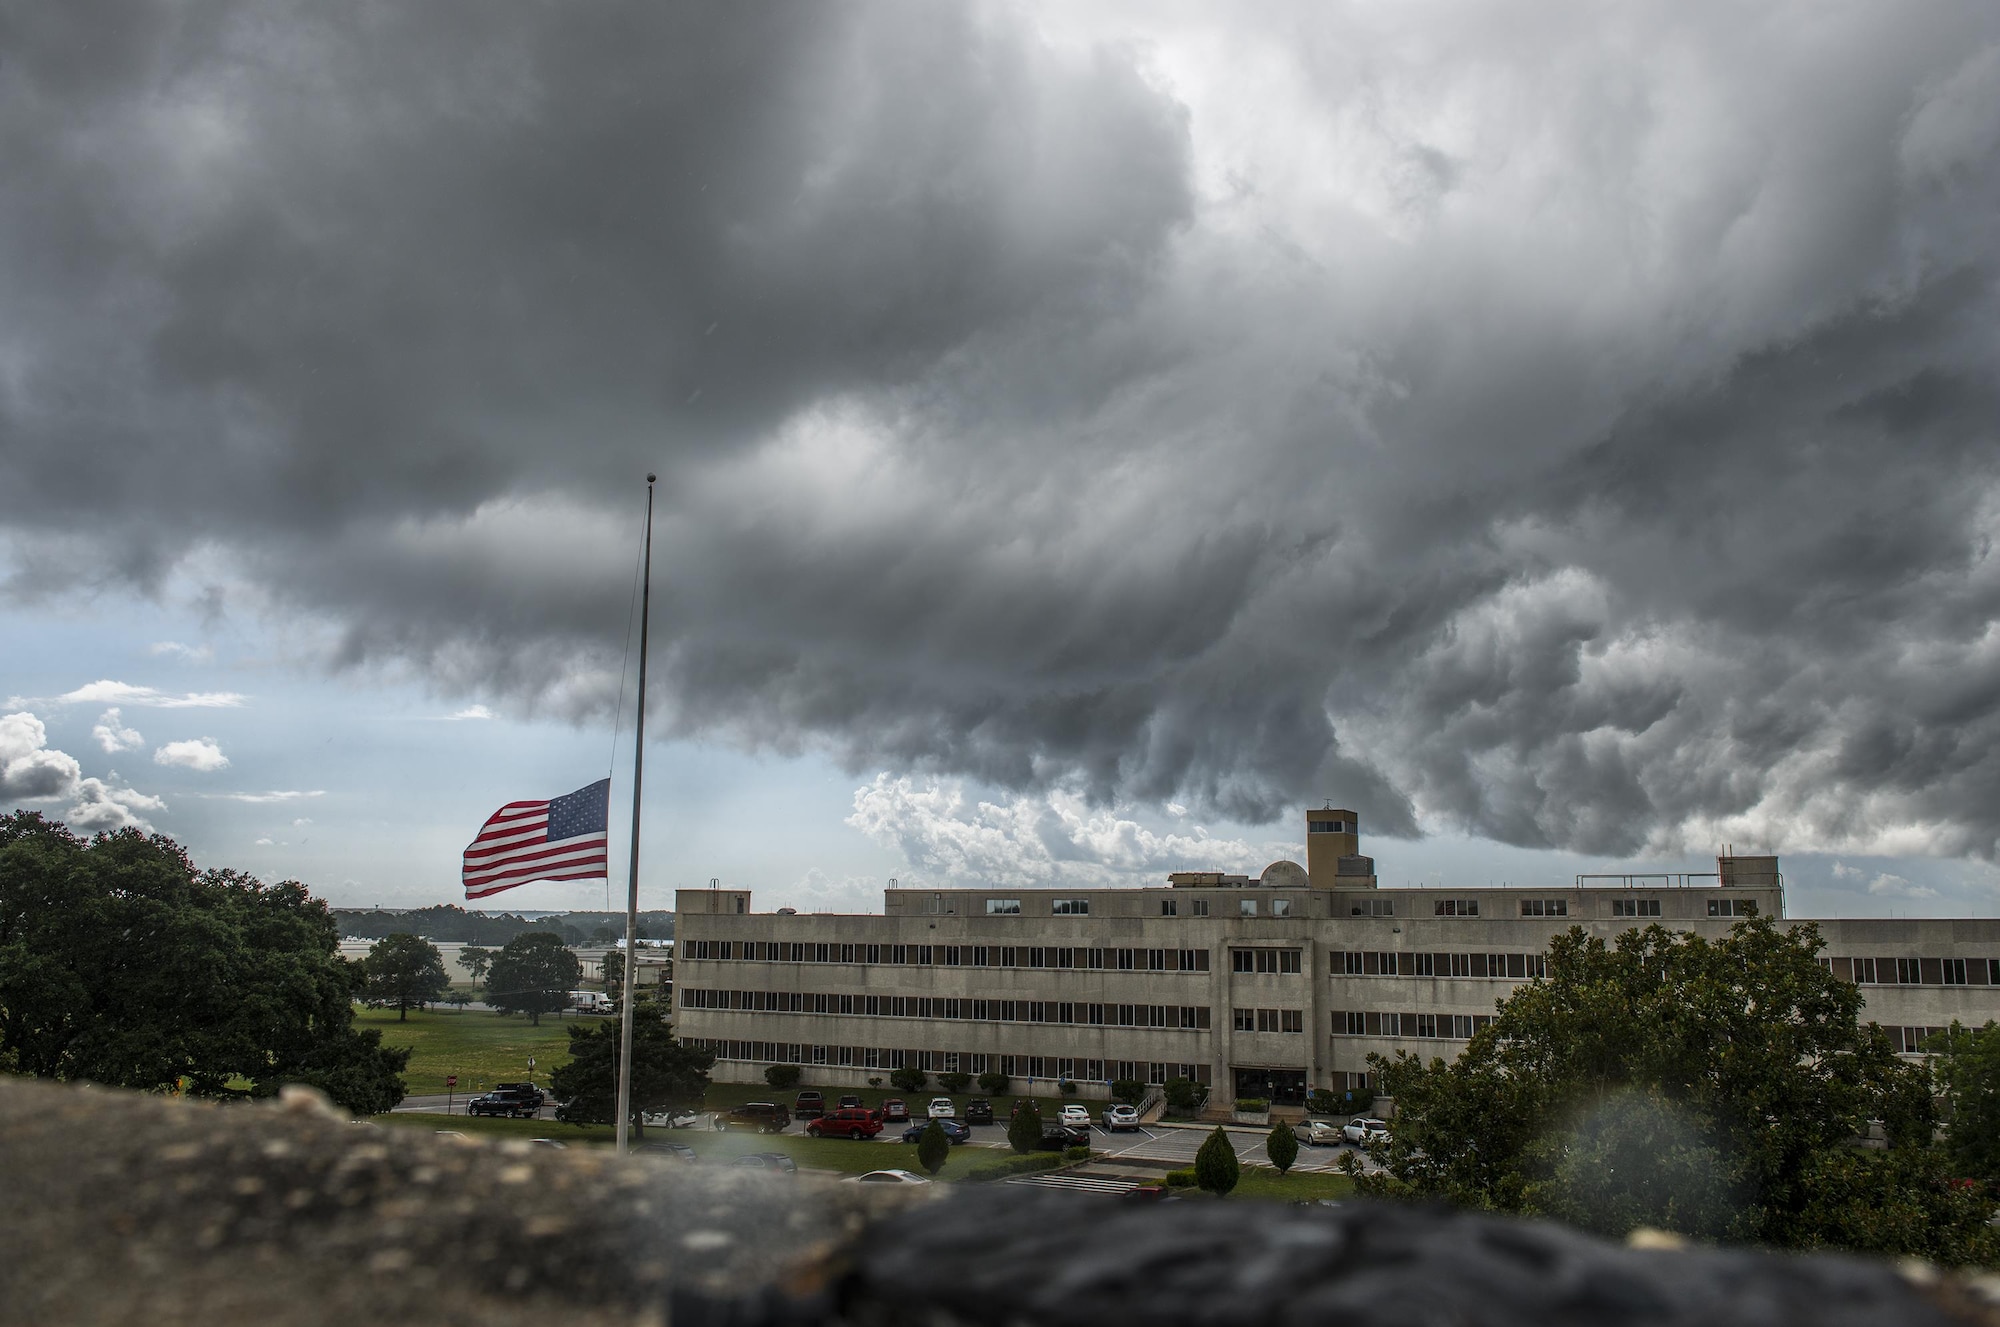 A dark storm cloud moves toward the 96th Test Wing headquarters building the morning of July 12 at Eglin Air Force Base, Fla.  The summer storm brought heavy rain, wind and lightning through the area, but was gone in less than an hour.  (U.S. Air Force photo/Samuel King Jr.)